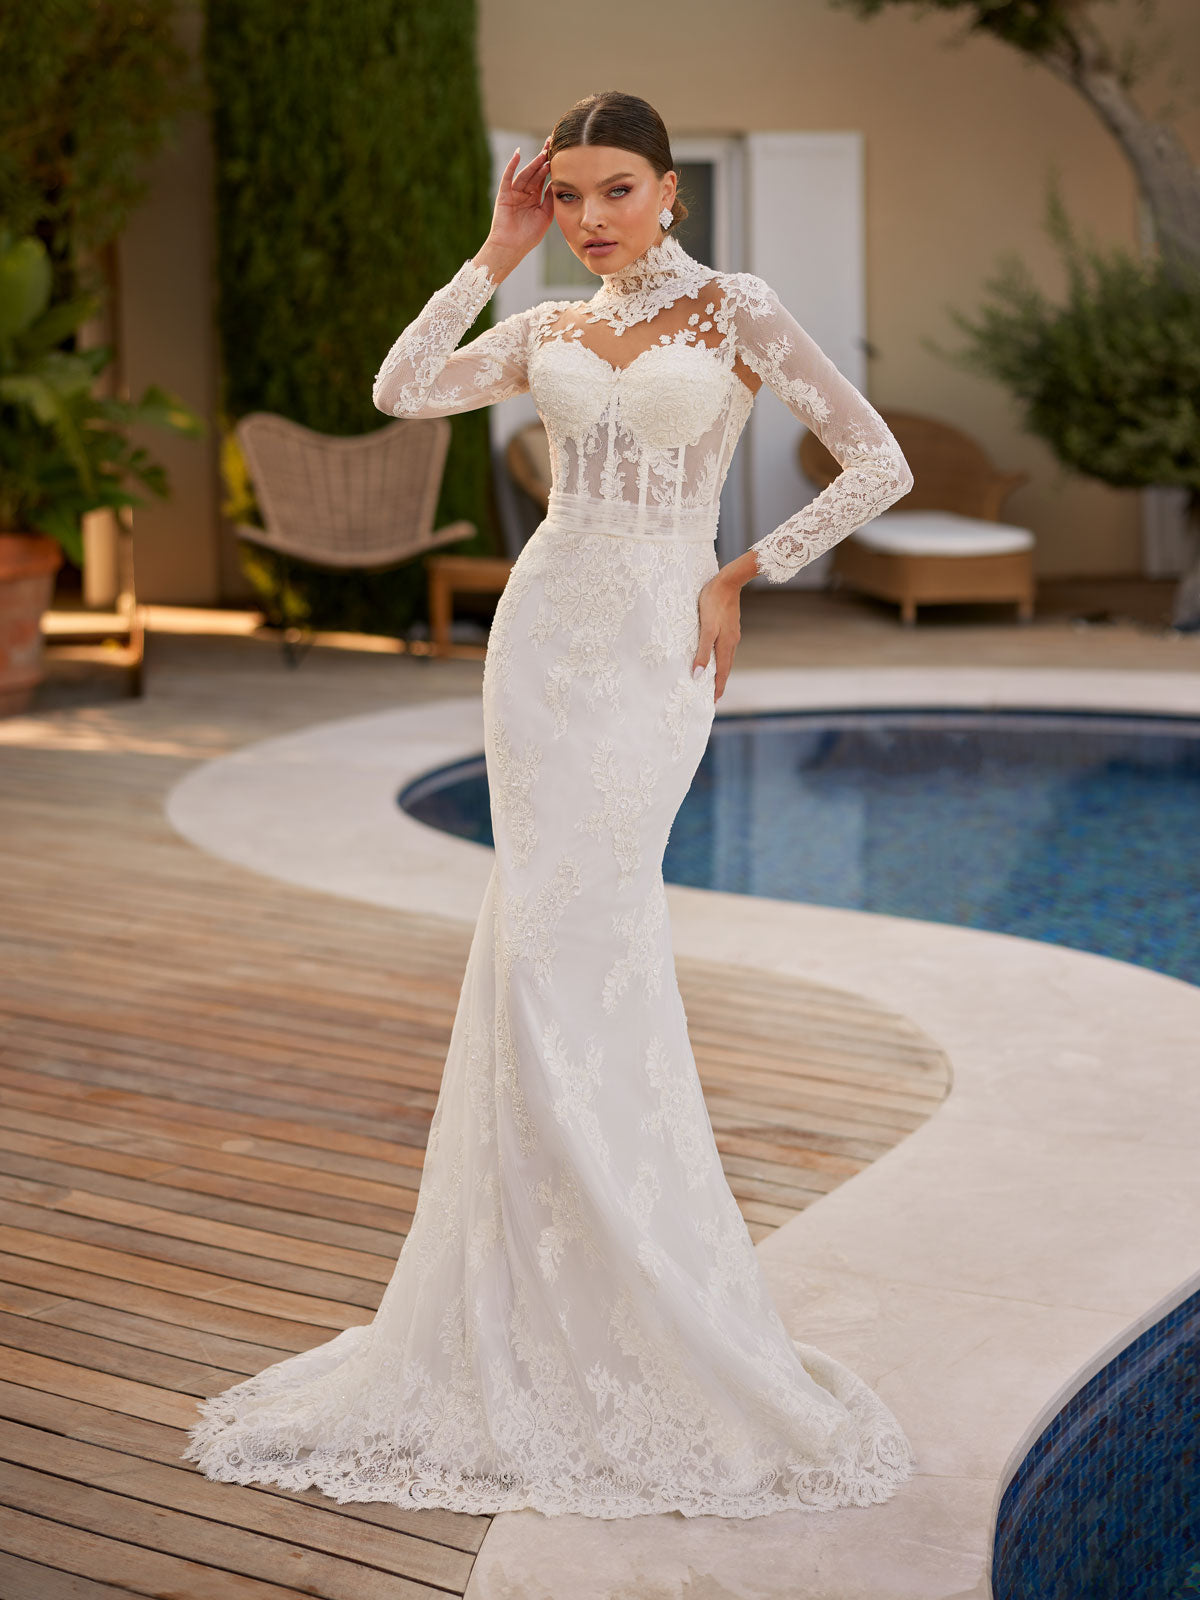 buy affordable fancy fairy classy Modest Classy Elegant High Neck İllusion Floral Applique Bridal Dress With Long Sleeve online wedding dress shops